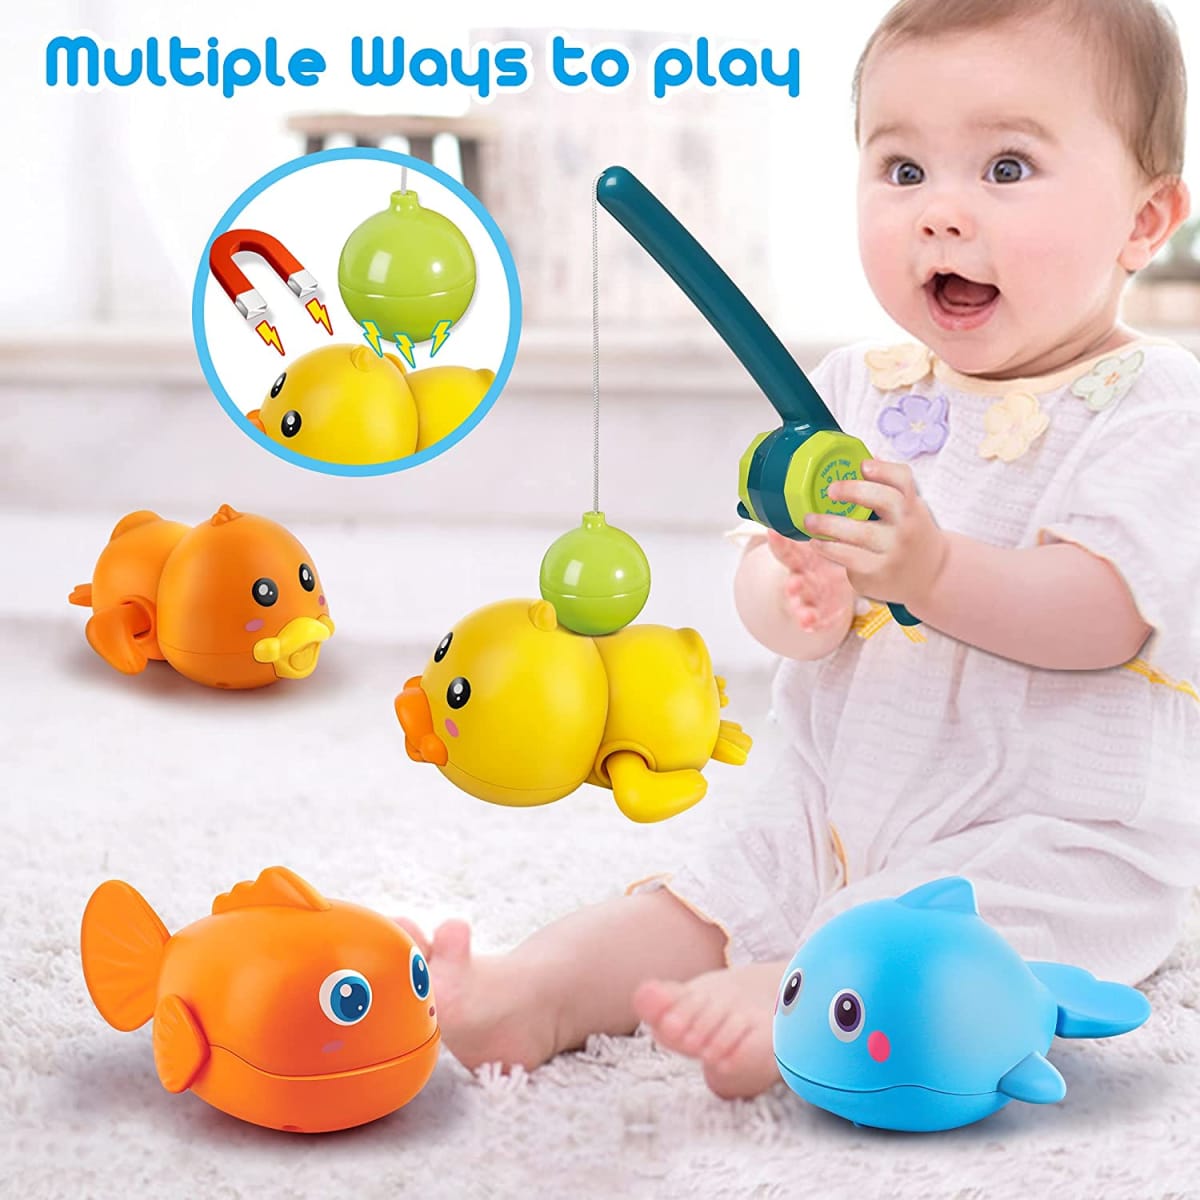 Bath Toys Magnetic Fishing Games Baby Bath Toys, Wind-up Swimming Fish Duck Whale Toys Floating Pool Bathtub Tub Toys for Toddlers Kids Infant Age 18 Months and up Girl Boy